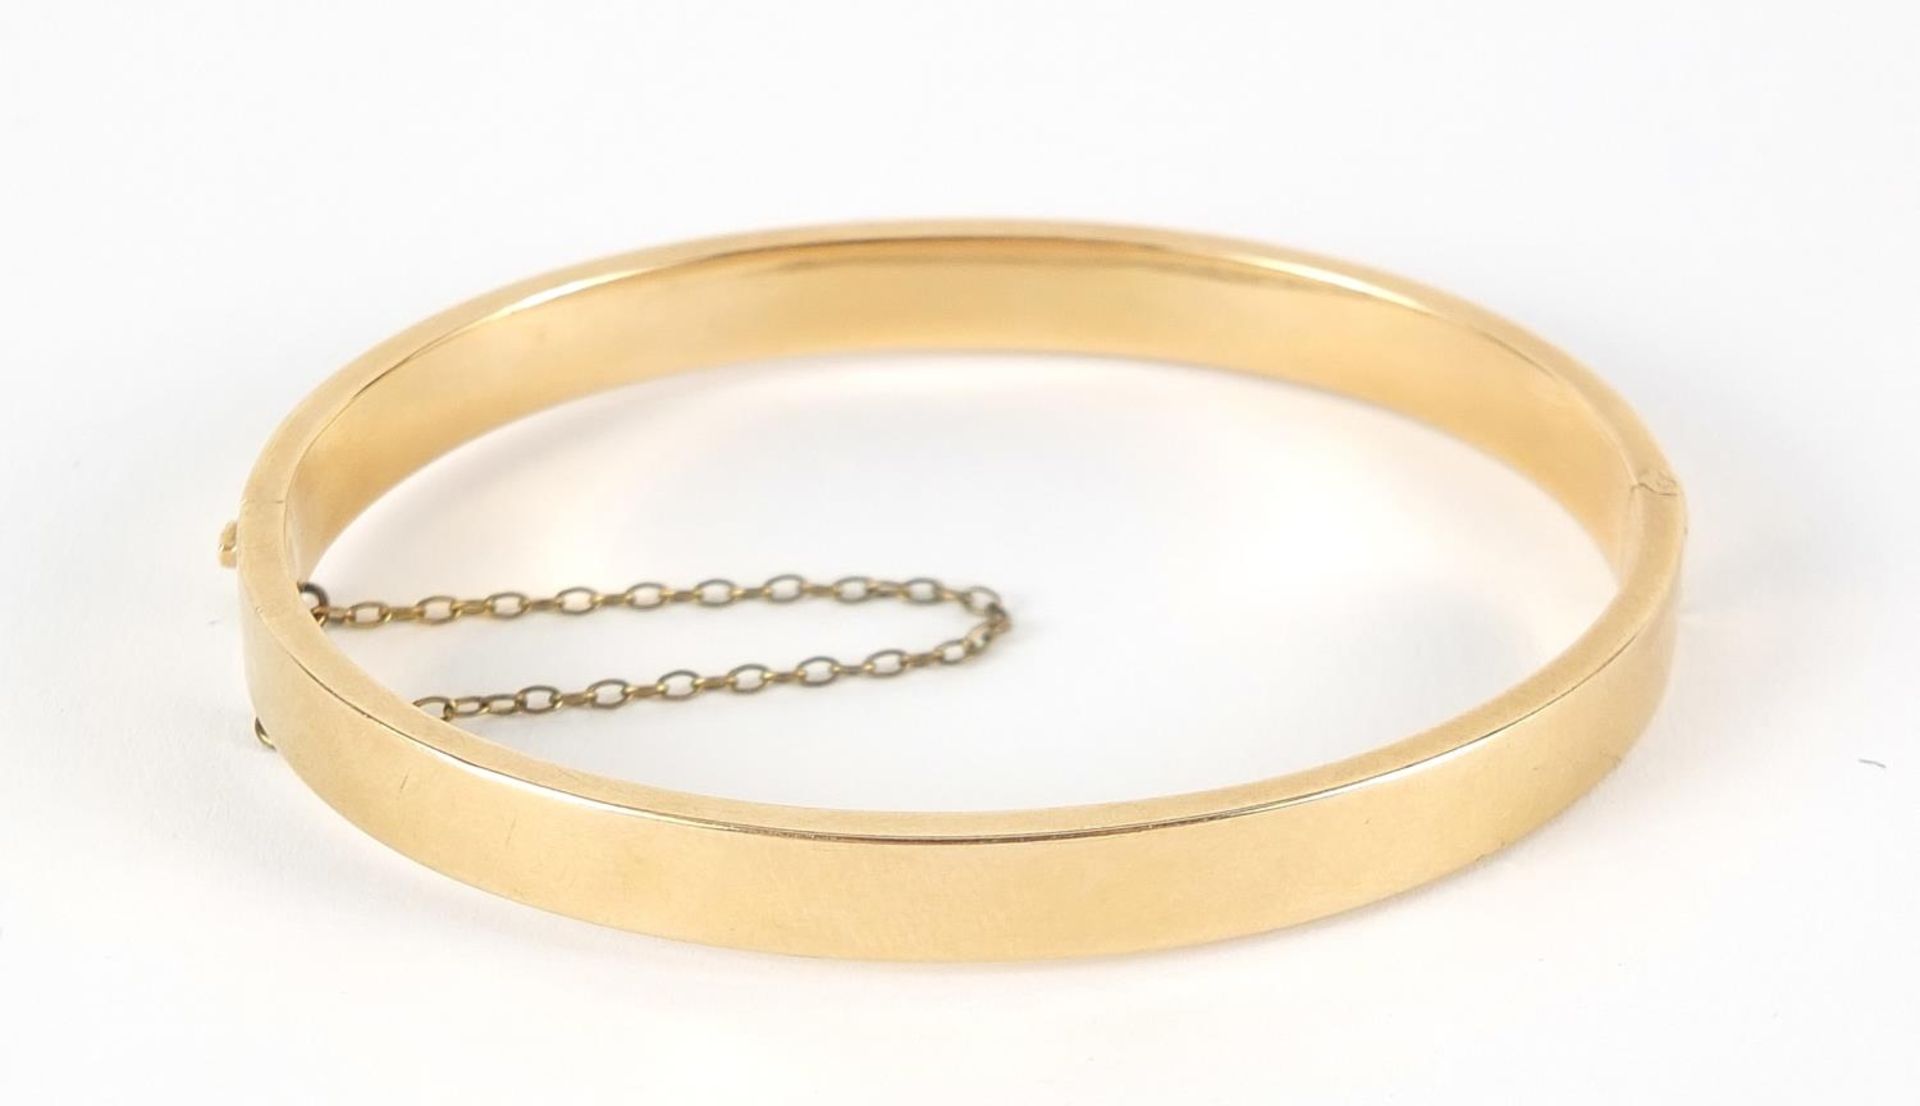 15ct gold hinged bangle, 6.5cm wide, 10.0g : For Further Condition Reports Please Visit Our